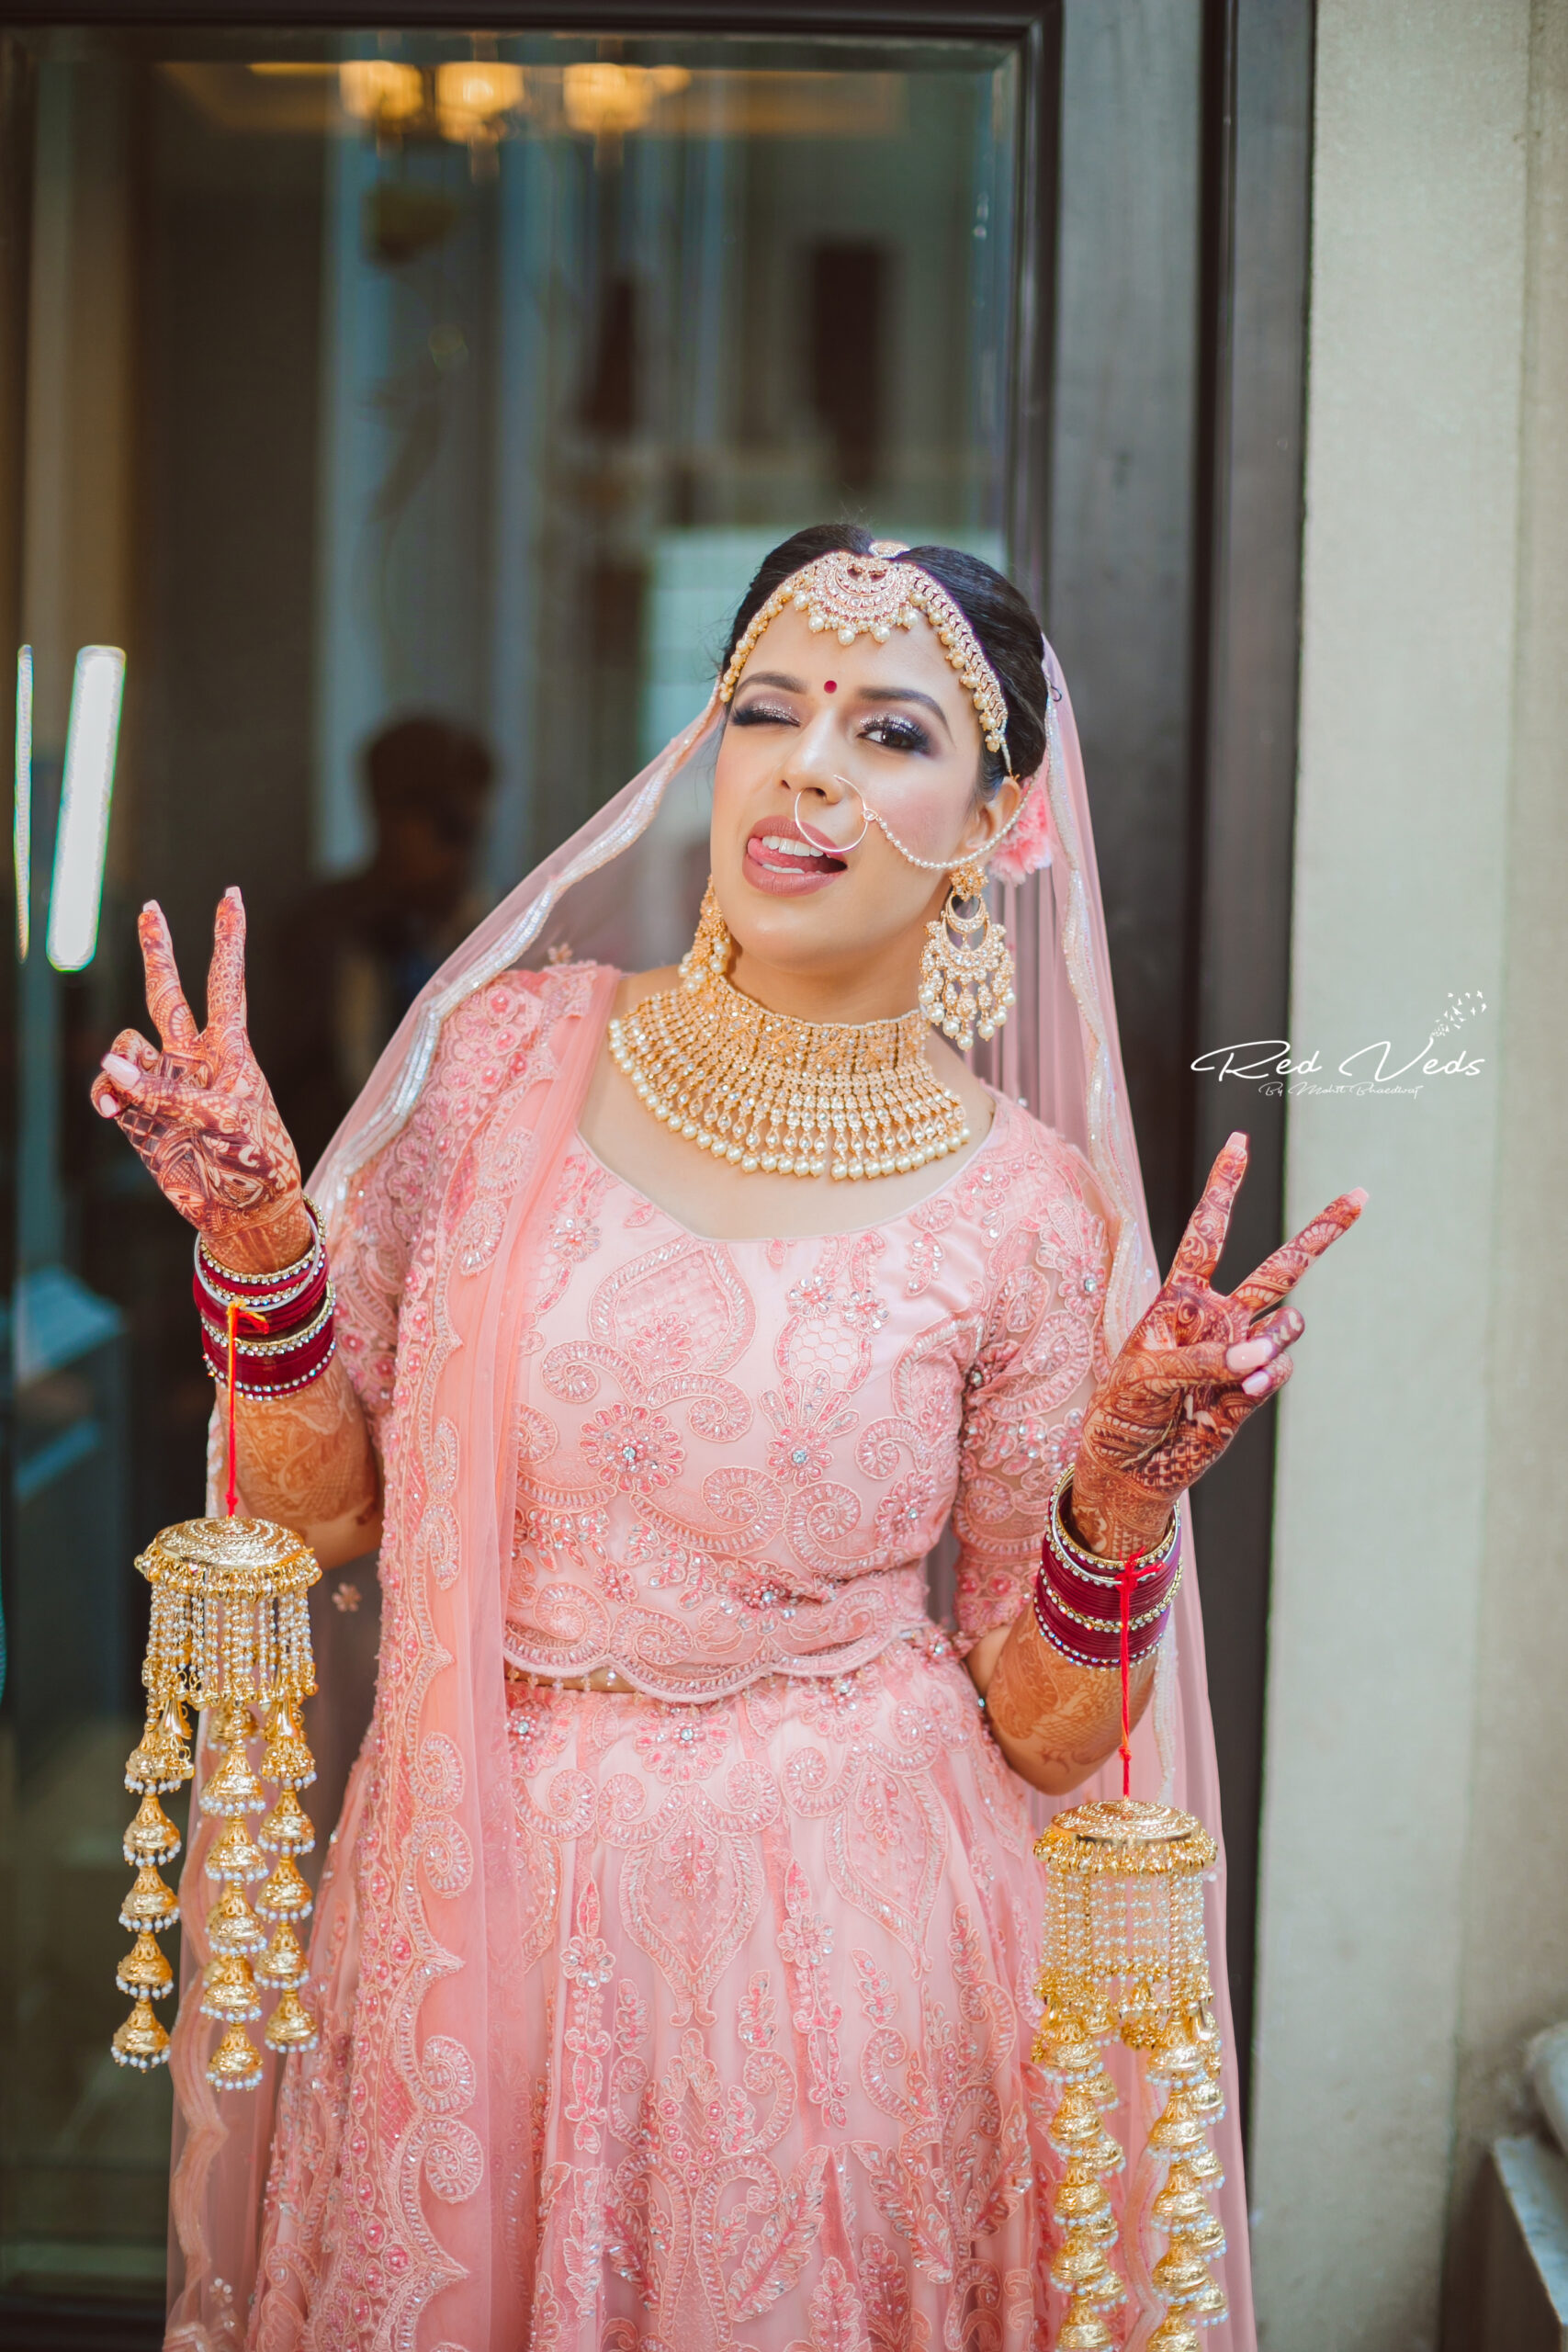 Pin by Raheel on Pins by you | Bride photography poses, Indian bride photography  poses, Indian bride poses